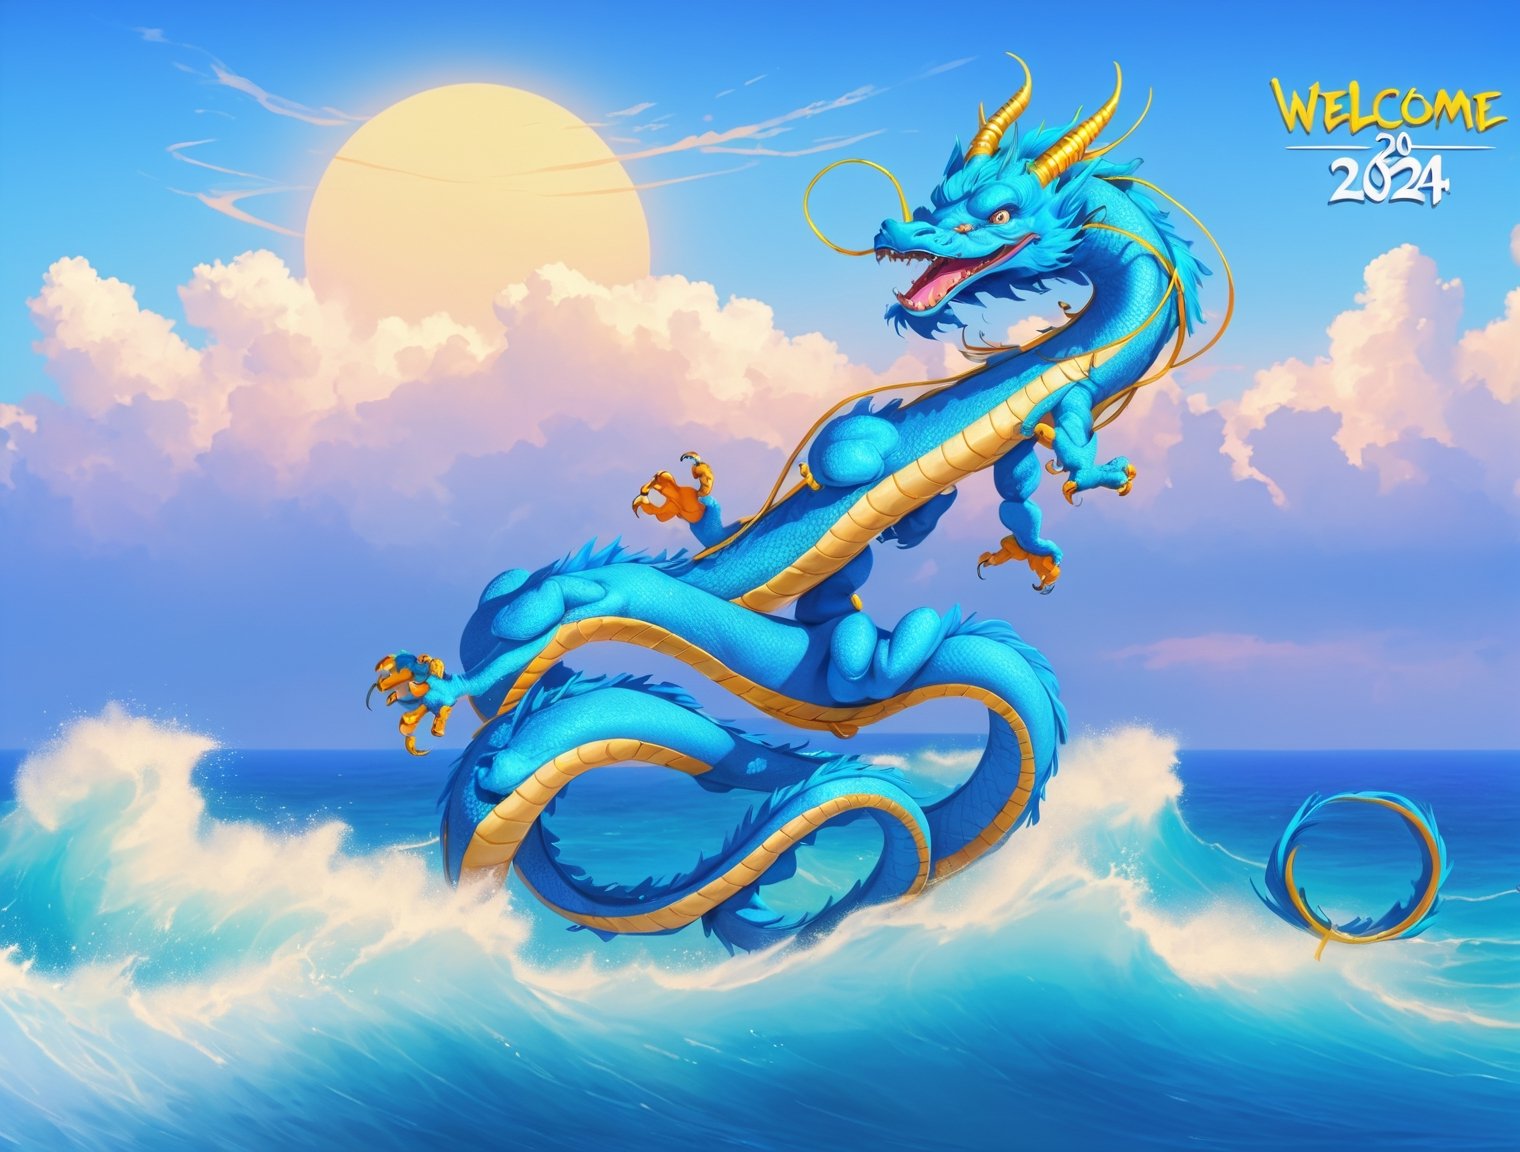 asian blue dragon flying in the sky flying in the sky,Asian blue dragon flying across the vast ocean horizon, epic daylight, solo, dynamic angle,aw0k euphoric style, Text(“Welcome 2024”) is written in gold at the top left of the screen.
